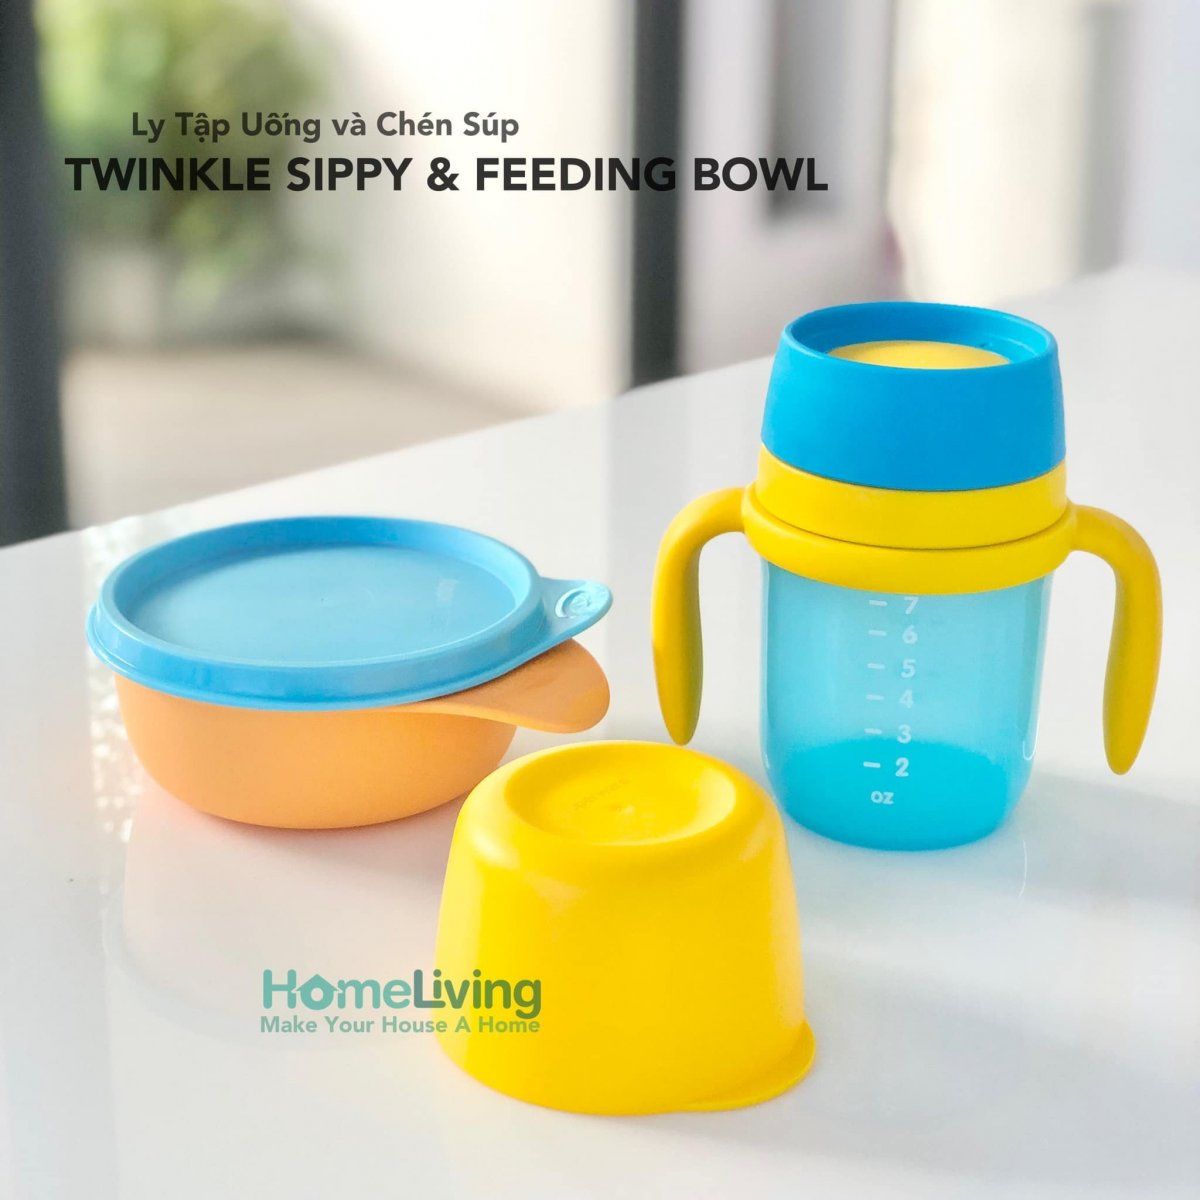 BÌNH TẬP UỐNG TWINKLE SIPPY 250ML